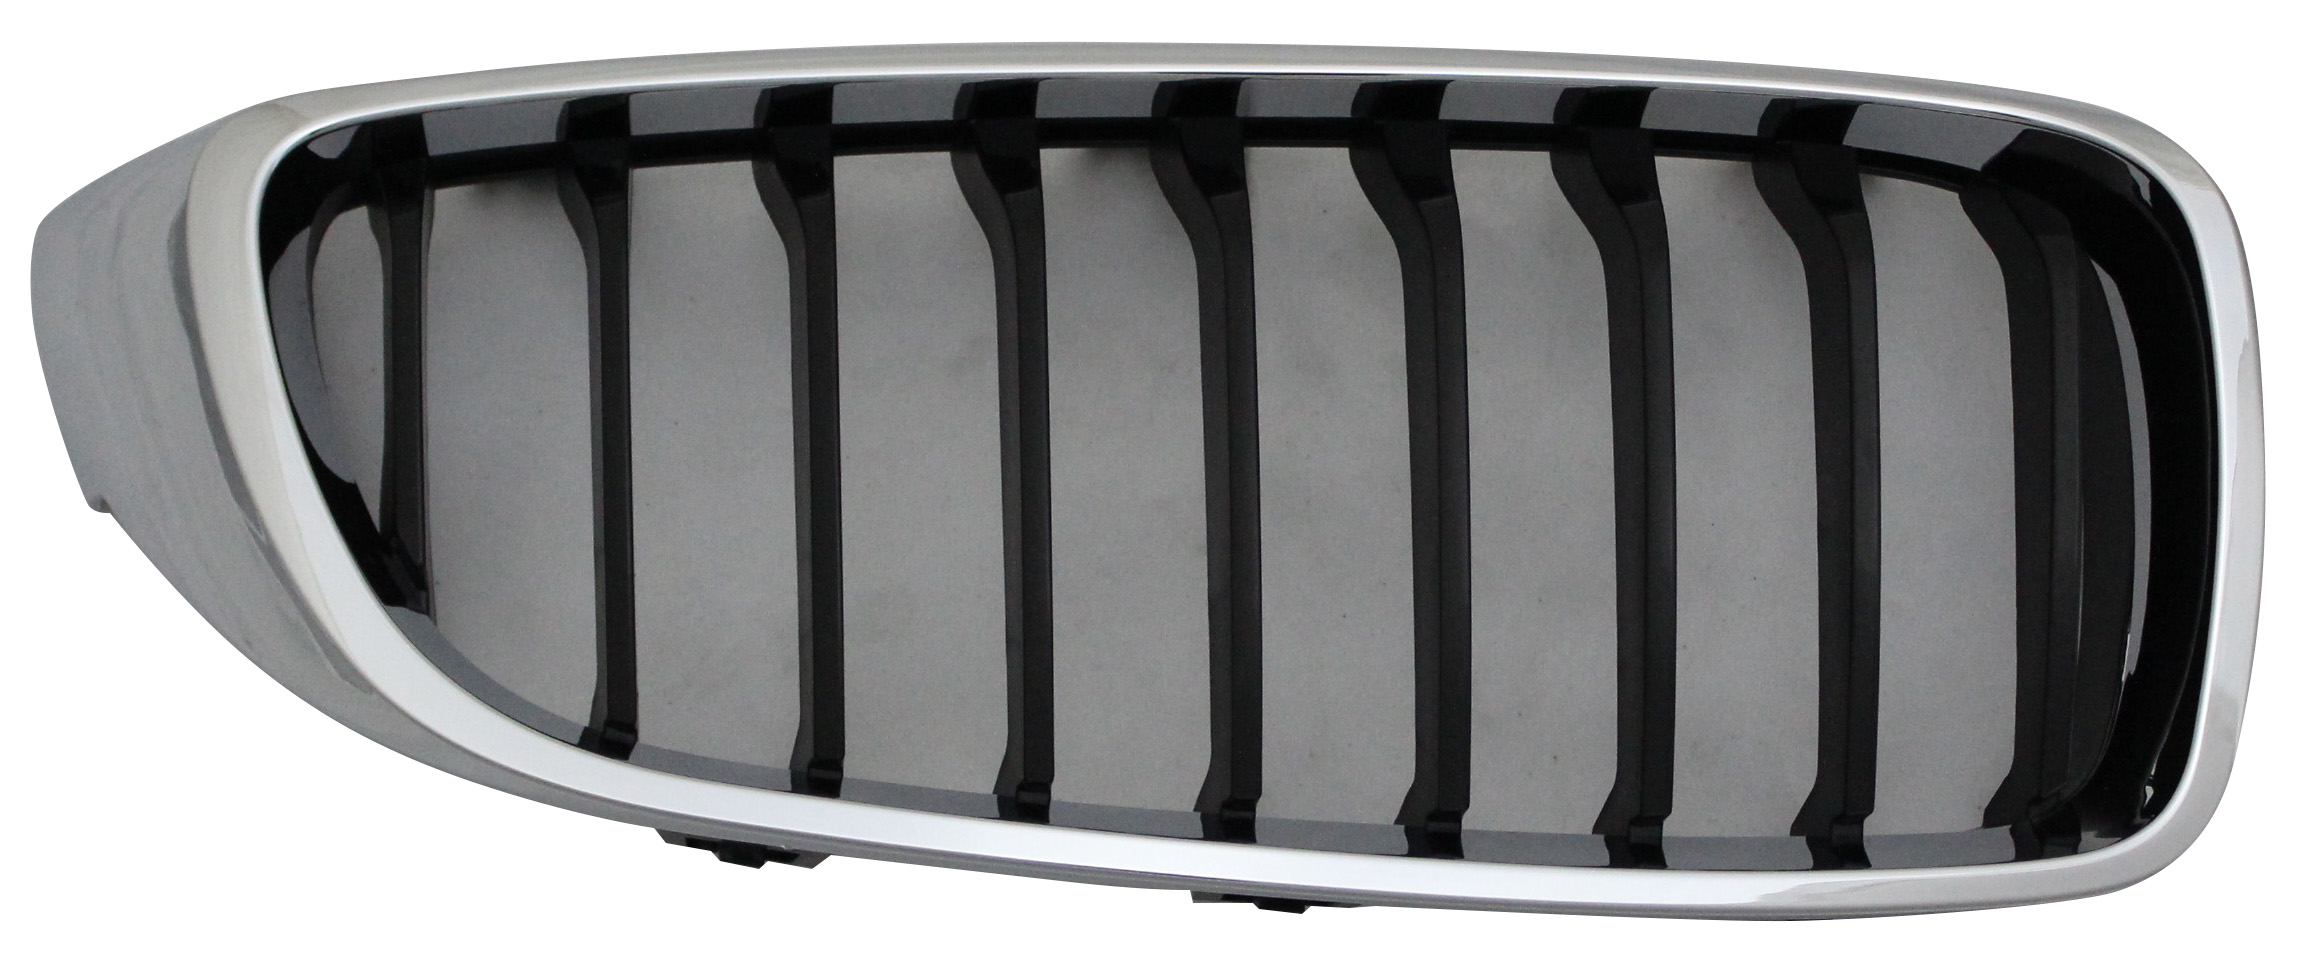 Aftermarket GRILLES for BMW - 440I GRAN COUPE, 440i Gran Coupe,17-19,Grille assy